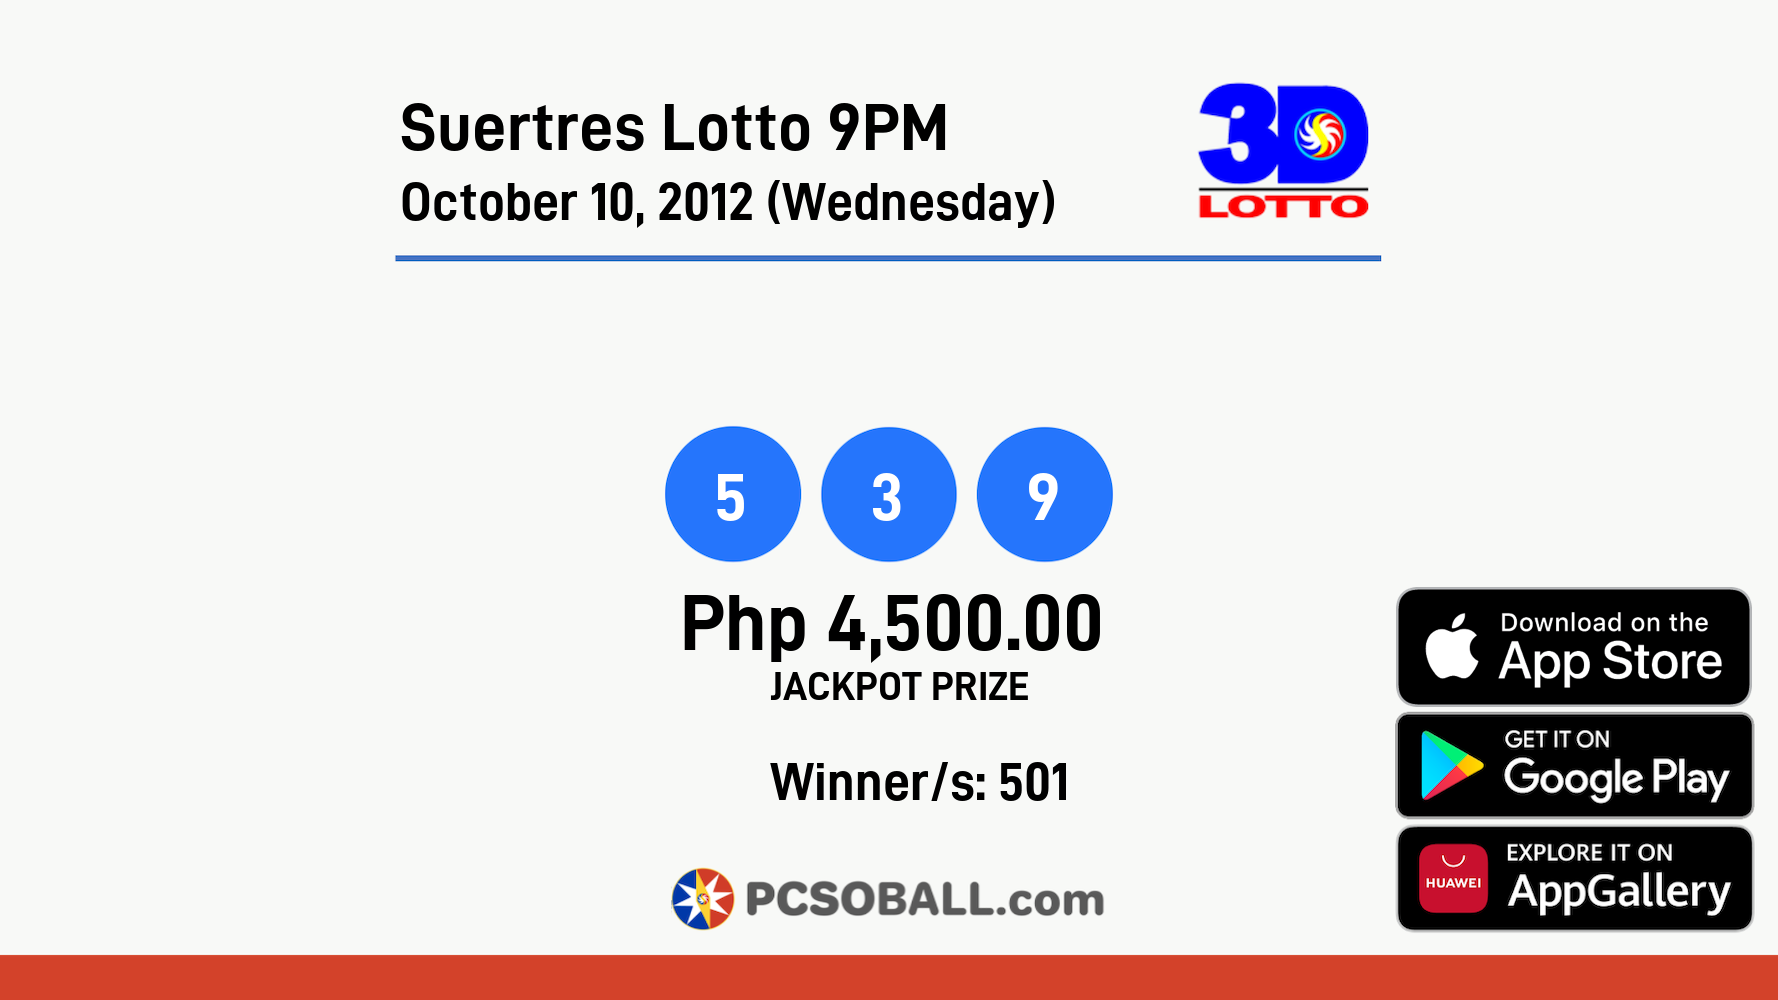 Suertres Lotto 9PM October 10, 2012 (Wednesday) Result